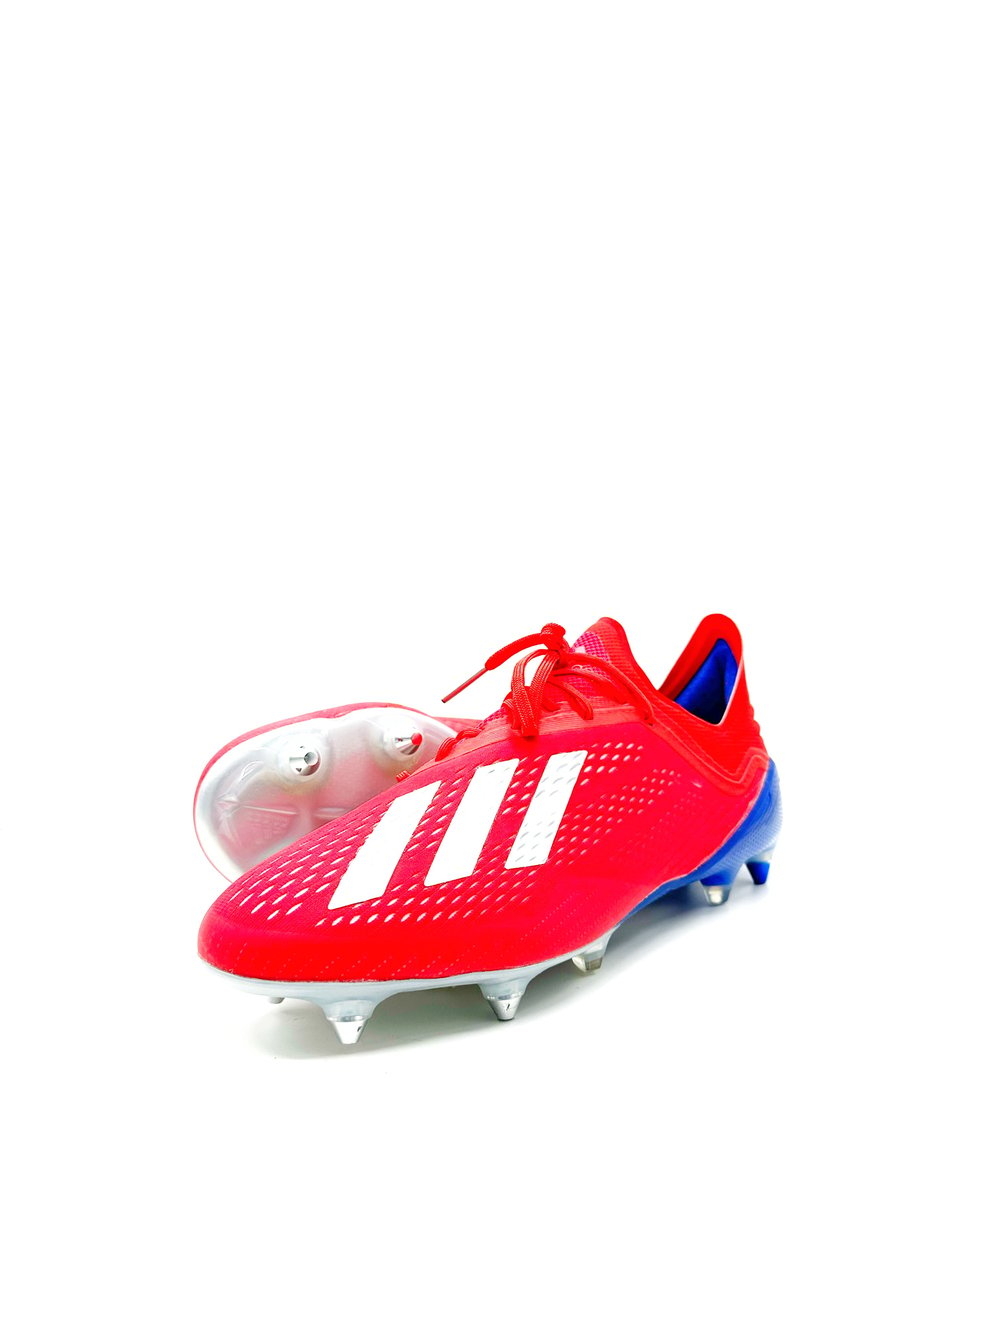 Image of Adidas 18.1 Red Blue SG 